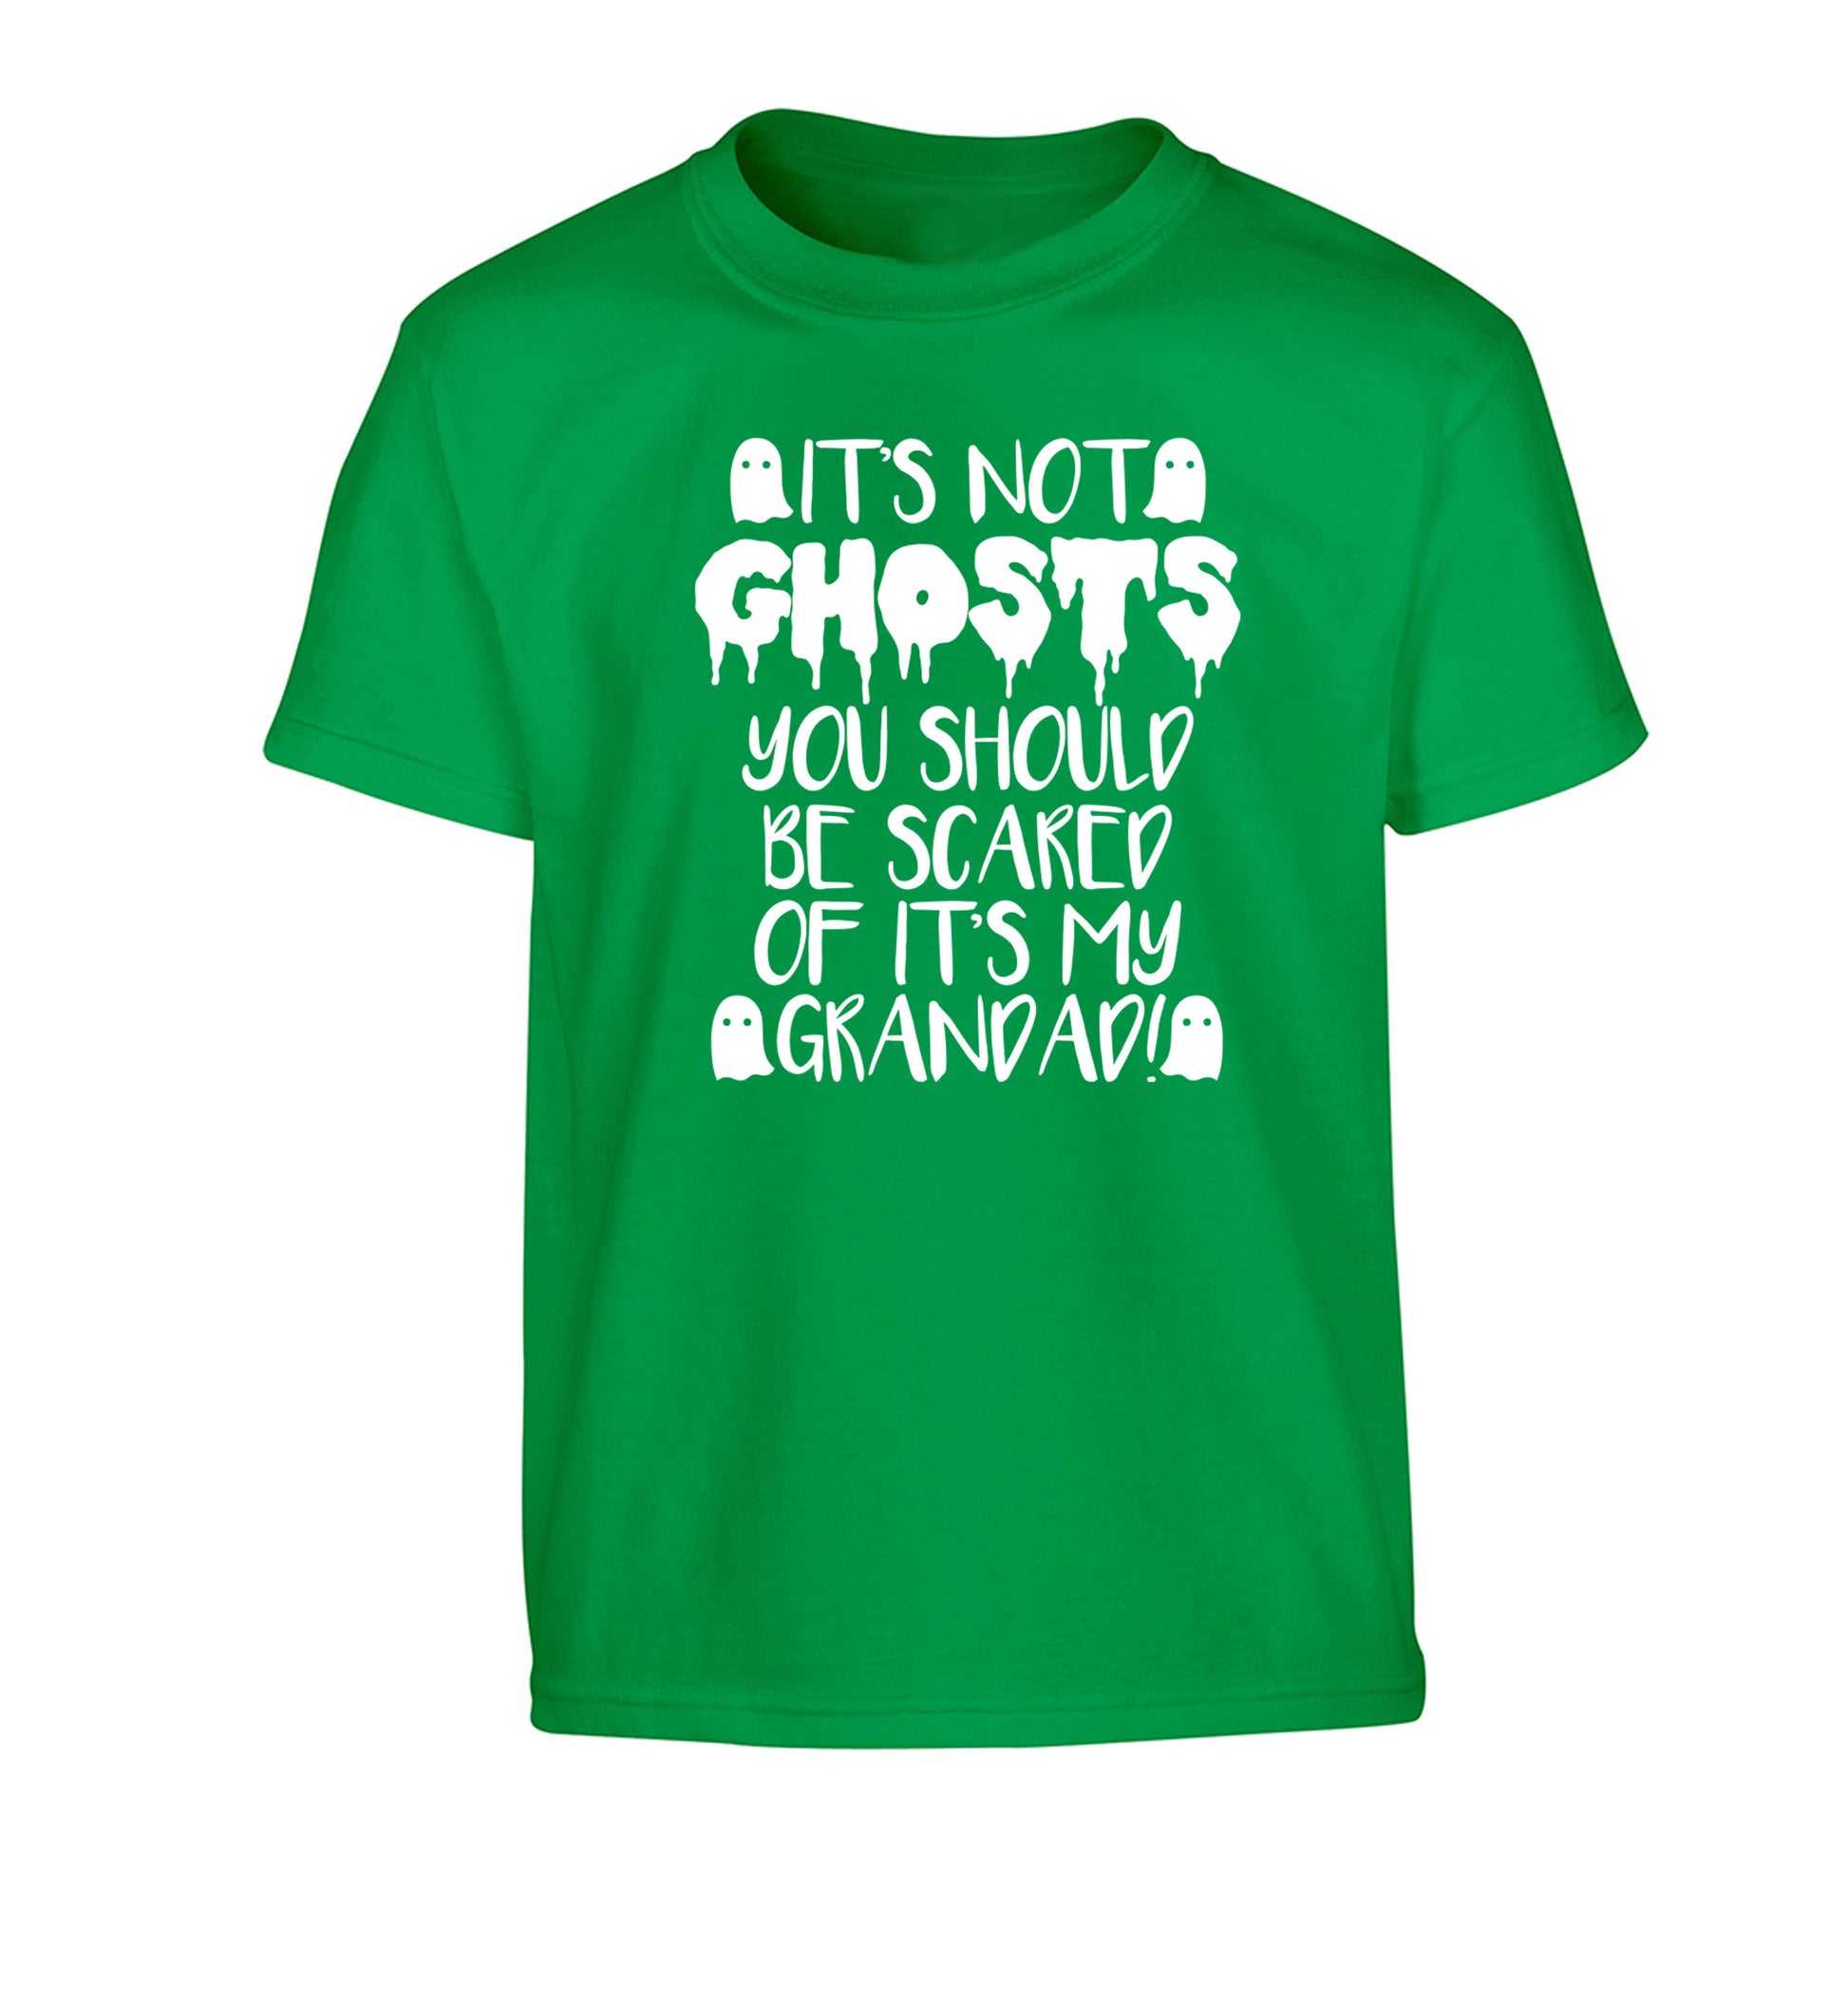 It's not ghosts you should be scared of it's my grandad! Children's green Tshirt 12-14 Years